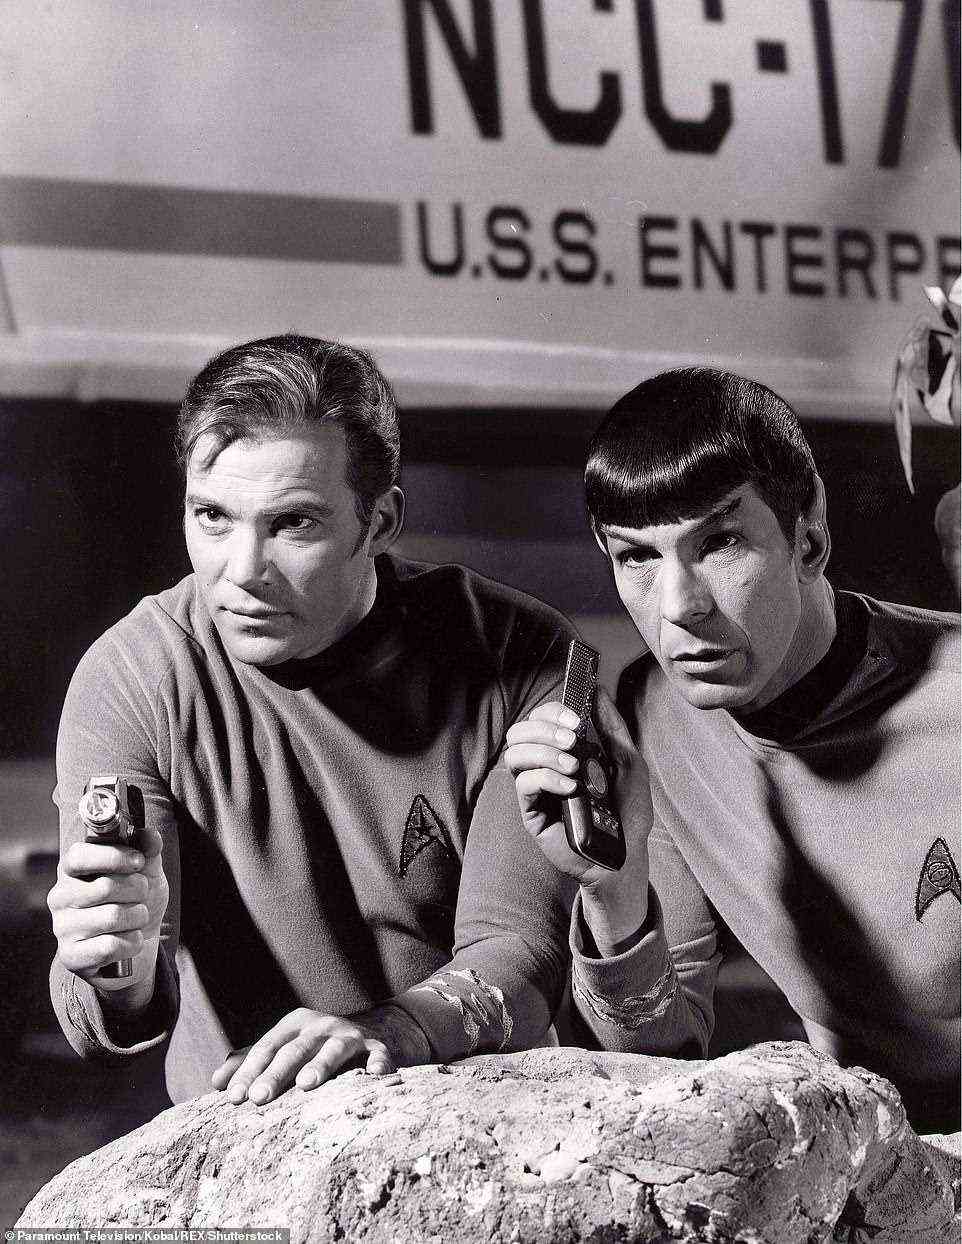 'I'm going to see the vastness of space and the extraordinary miracle of our Earth and how fragile it is compared to the forces at work in the universe,' Mr Shatner told NBC's ' Today ' program. Pictured: William Shatner as Captain Kirk in 'Star Trek'. Leonard Nimoy's Mr Spock can be seen holding a communicator, like the one replicated in paper by a young Jeff Bezos that Mr Shatner will be taking into space with him today